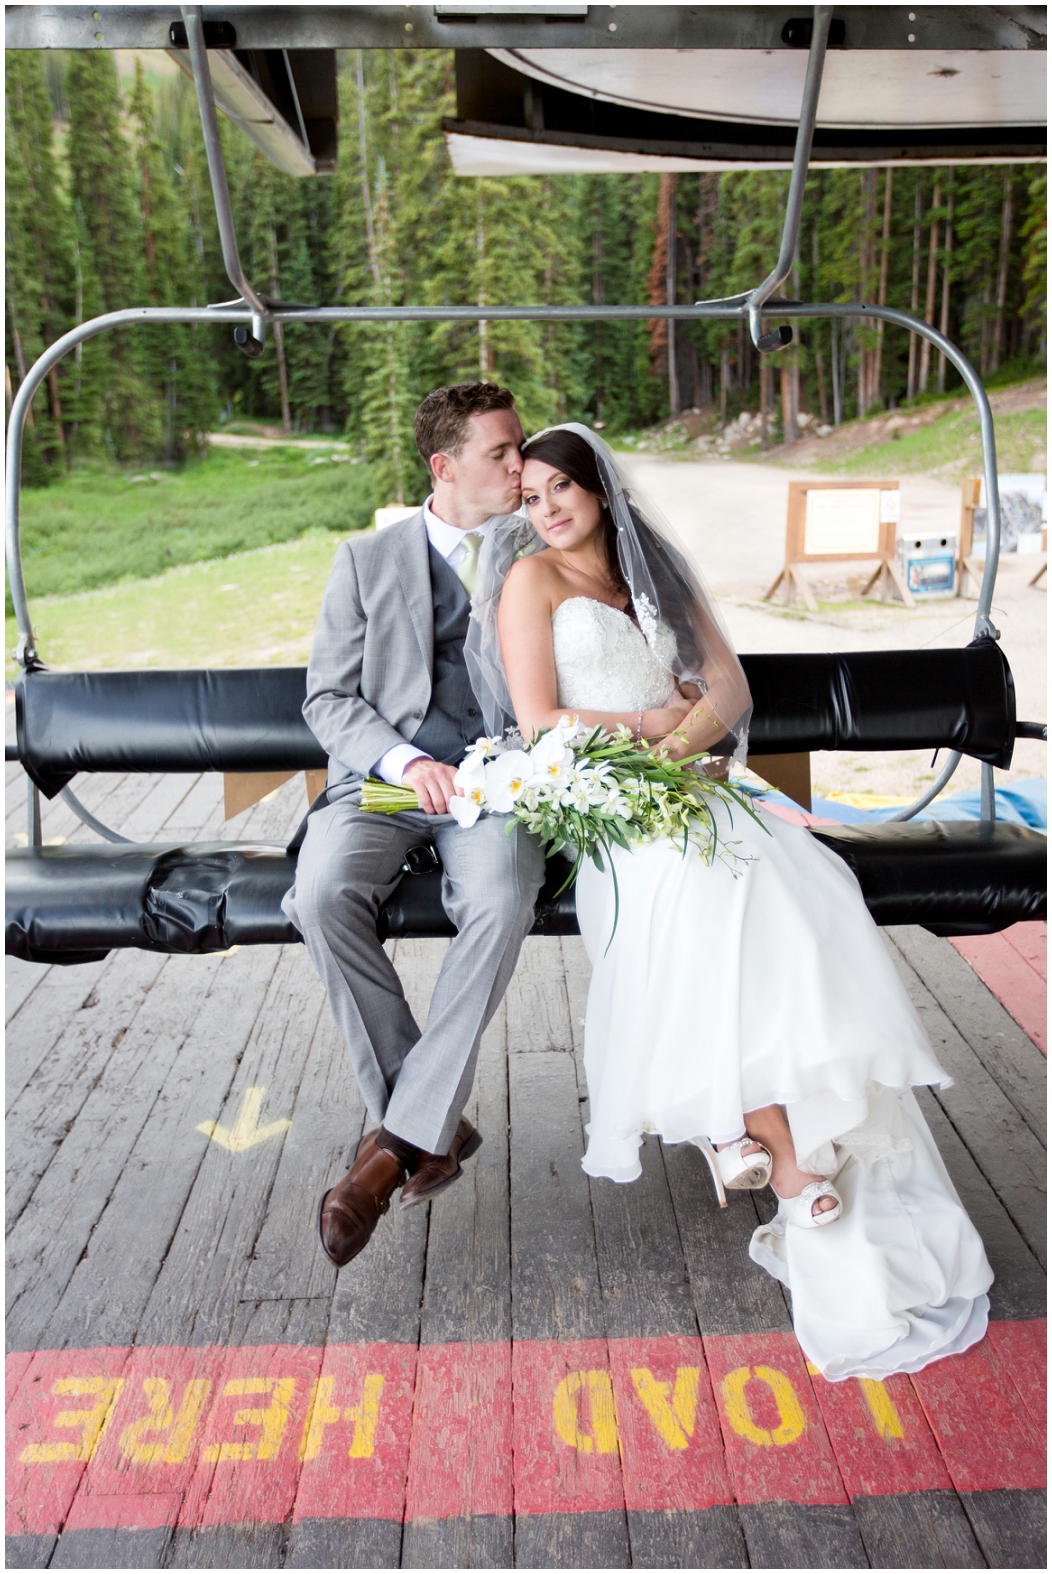 picture of bride and groom on a chairlift